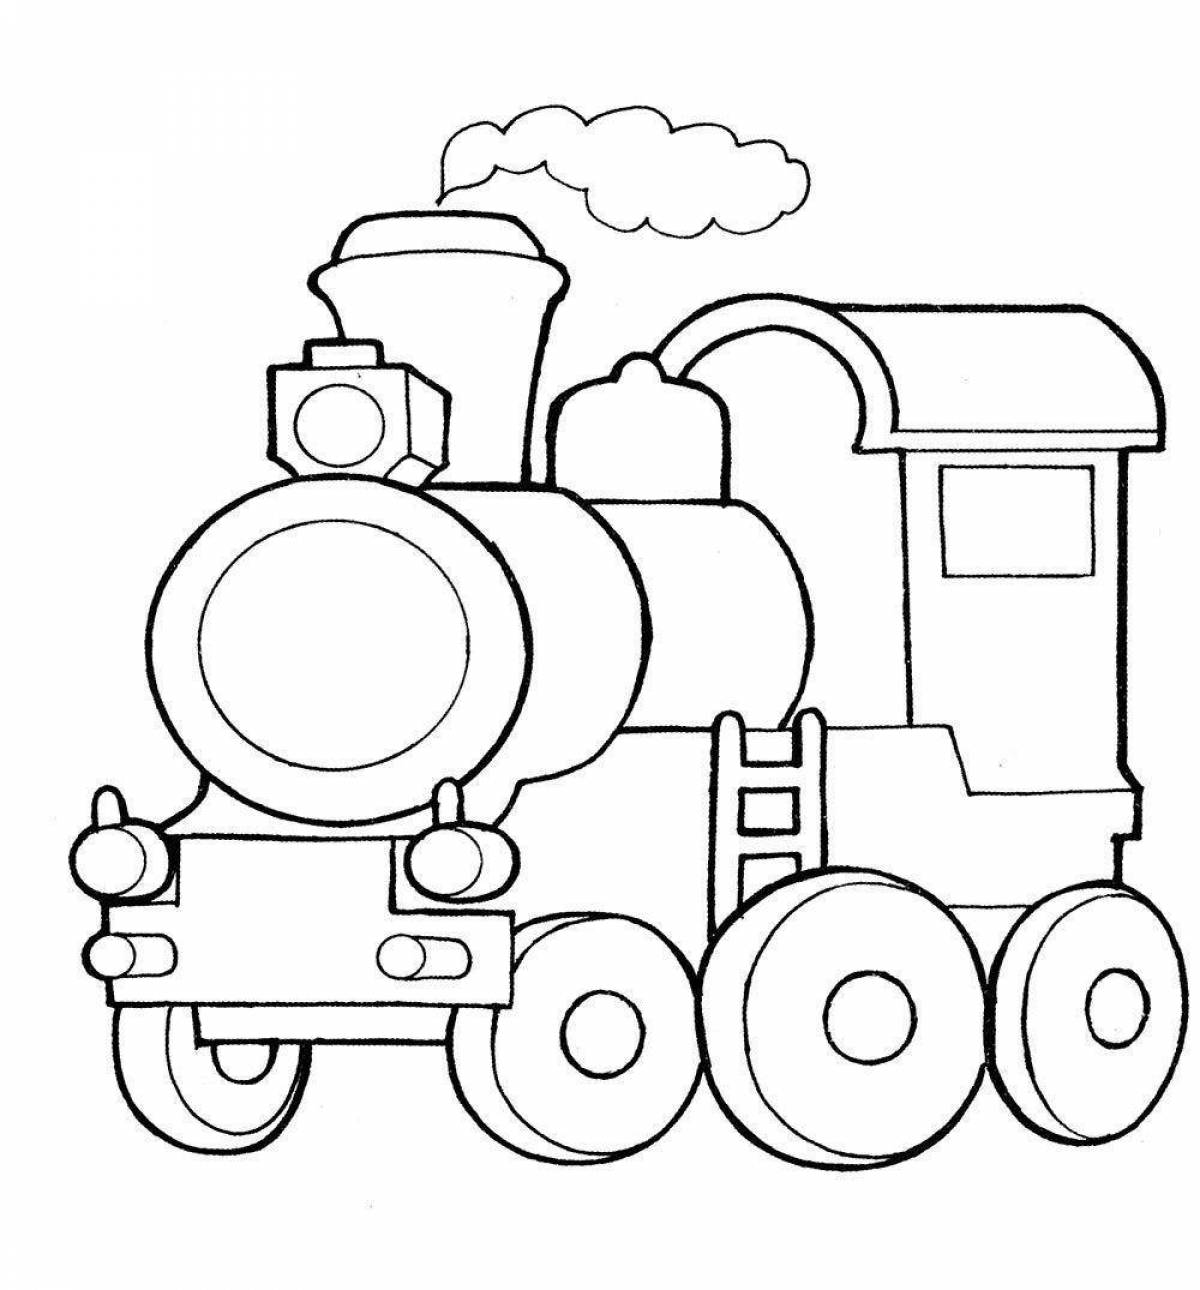 Coloring page nice steam locomotive for kids